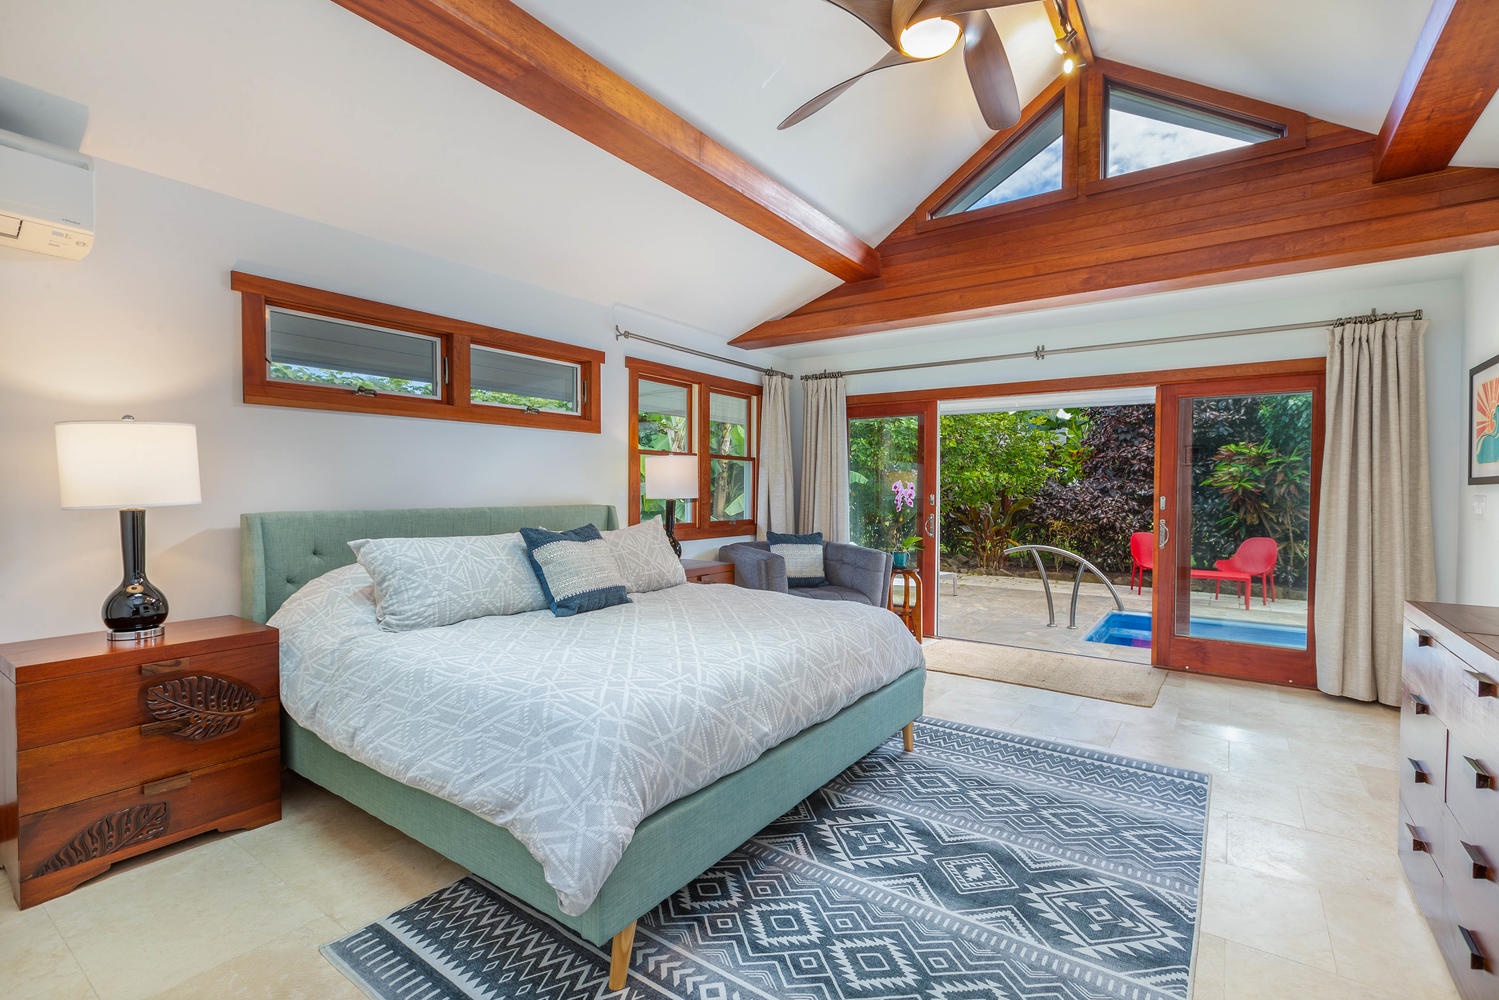 Princeville Vacation Rentals, Makana Lei - Primary bedroom with easy access to lanai